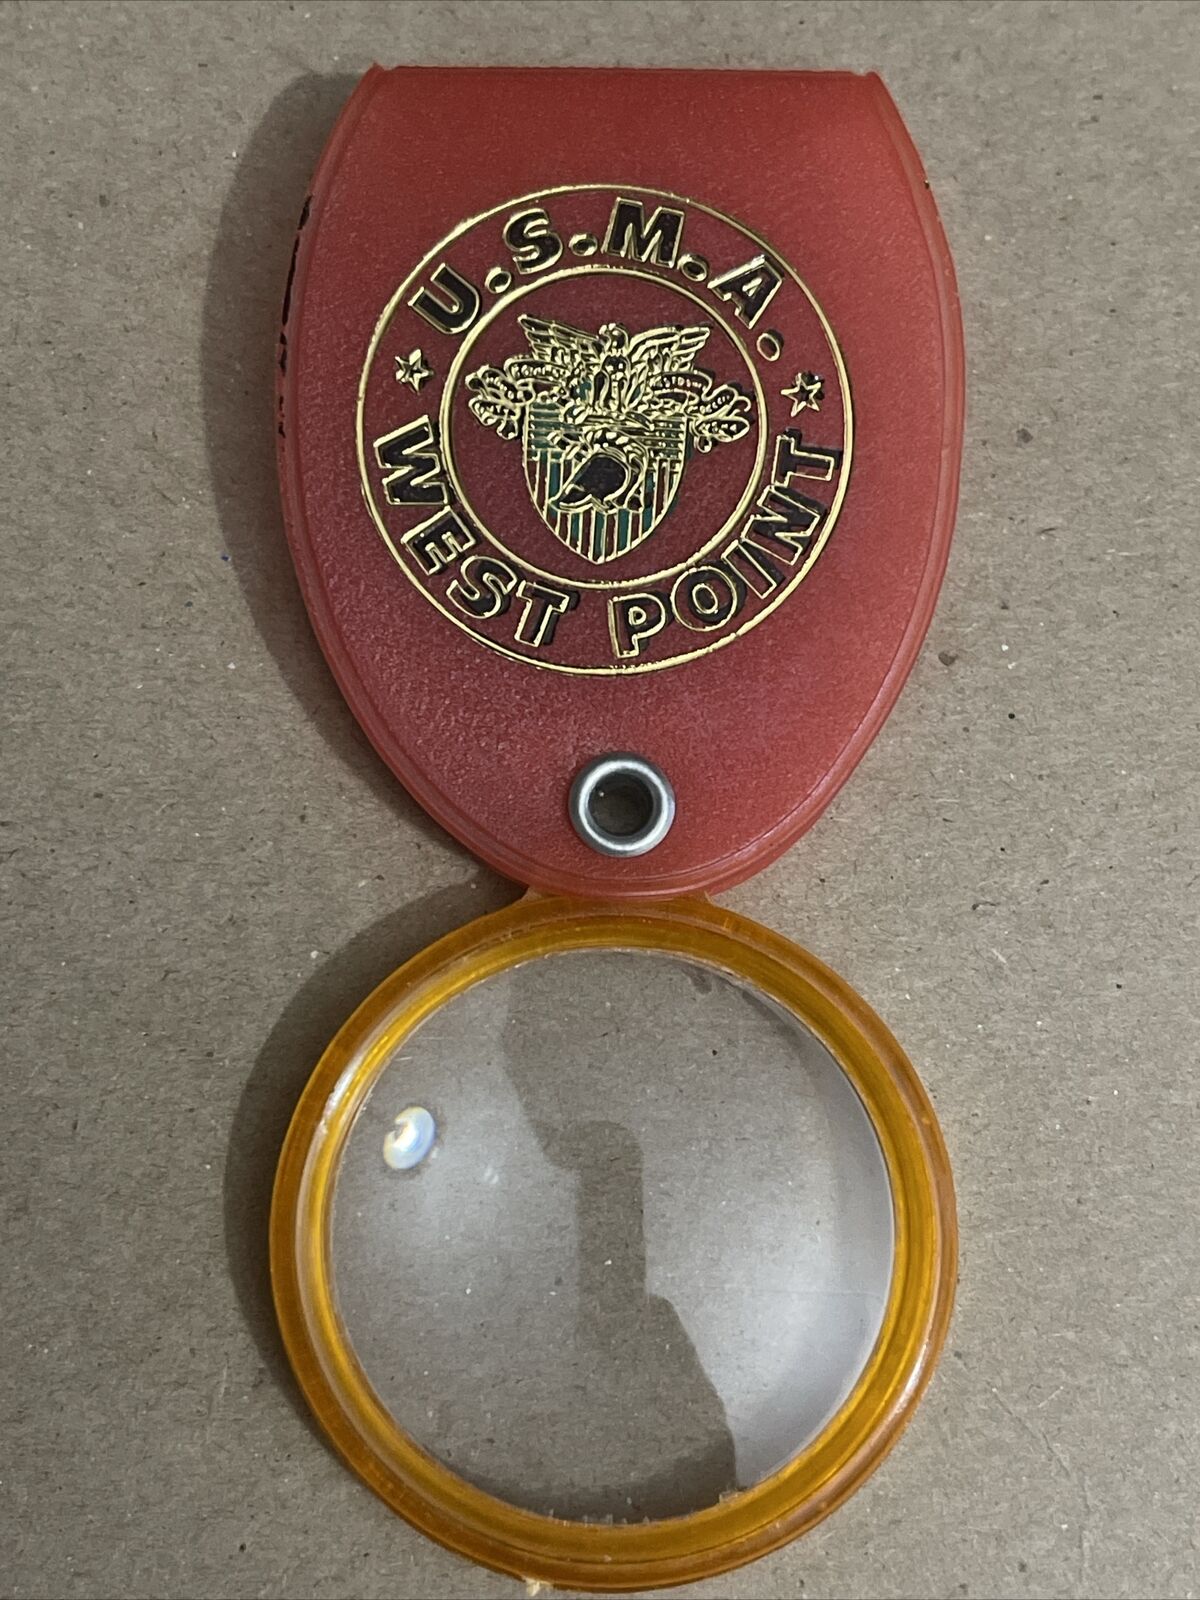 VINTAGE WEST POINT ARMY USMA PLASTIC MAGNIFYING GLASS